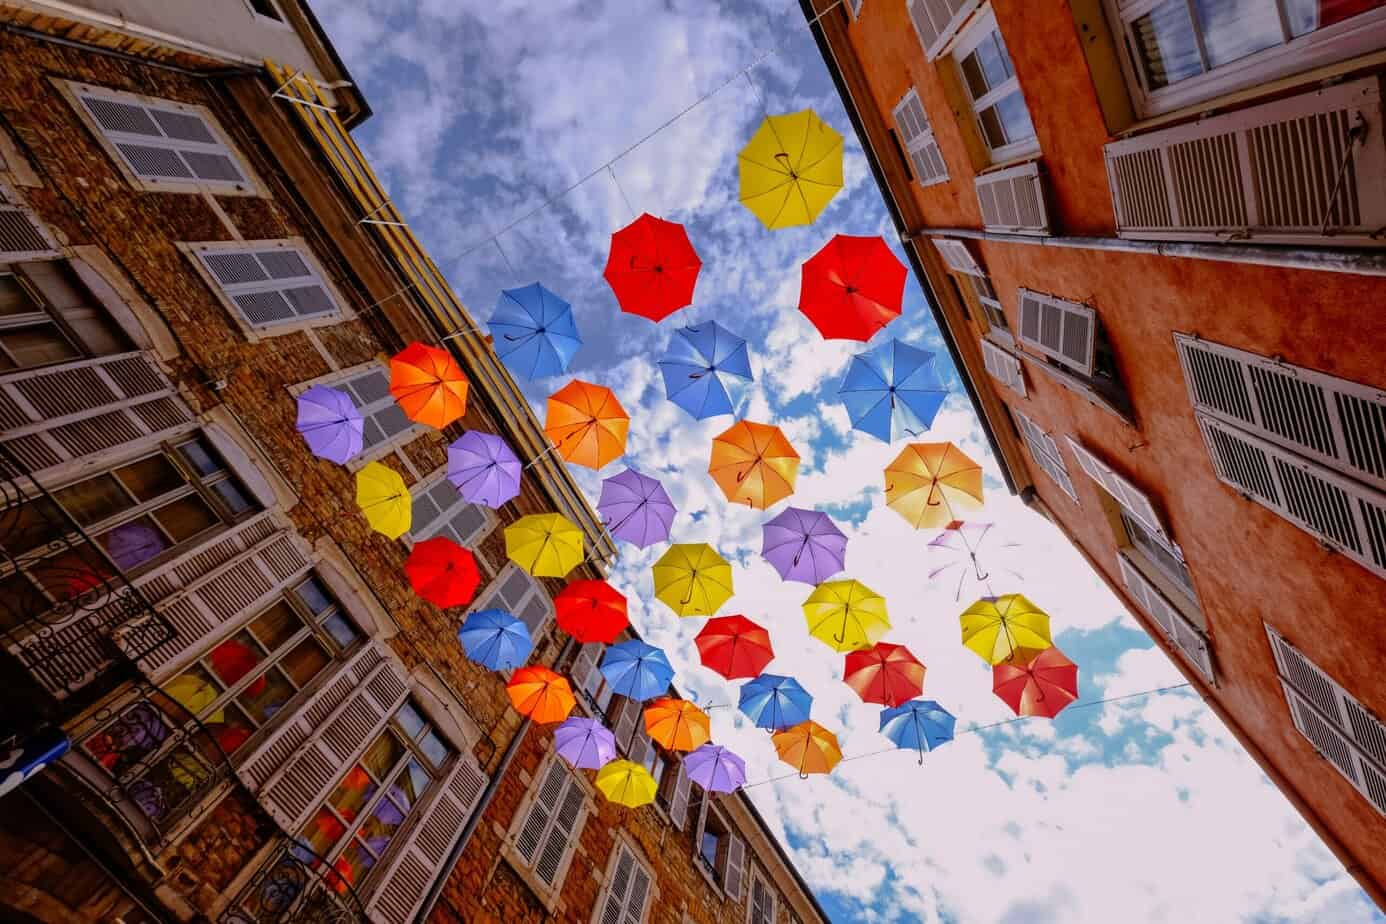 Looking up between two brick buildings at a art installation of colorful umbrellas